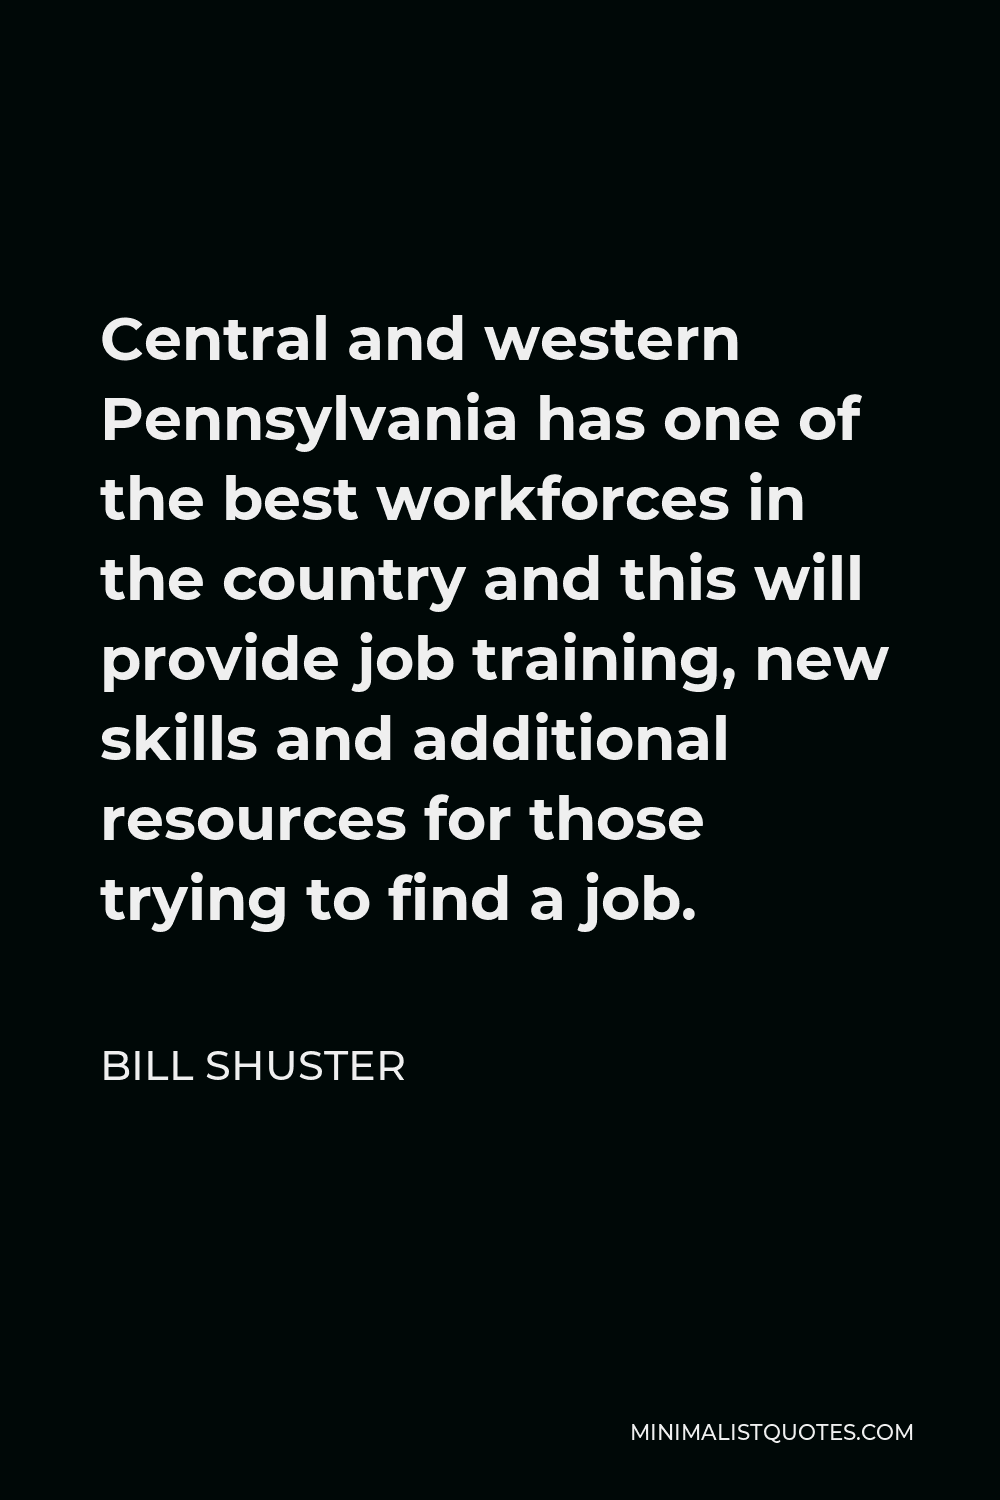 Bill Shuster Quote - Central and western Pennsylvania has one of the best workforces in the country and this will provide job training, new skills and additional resources for those trying to find a job.